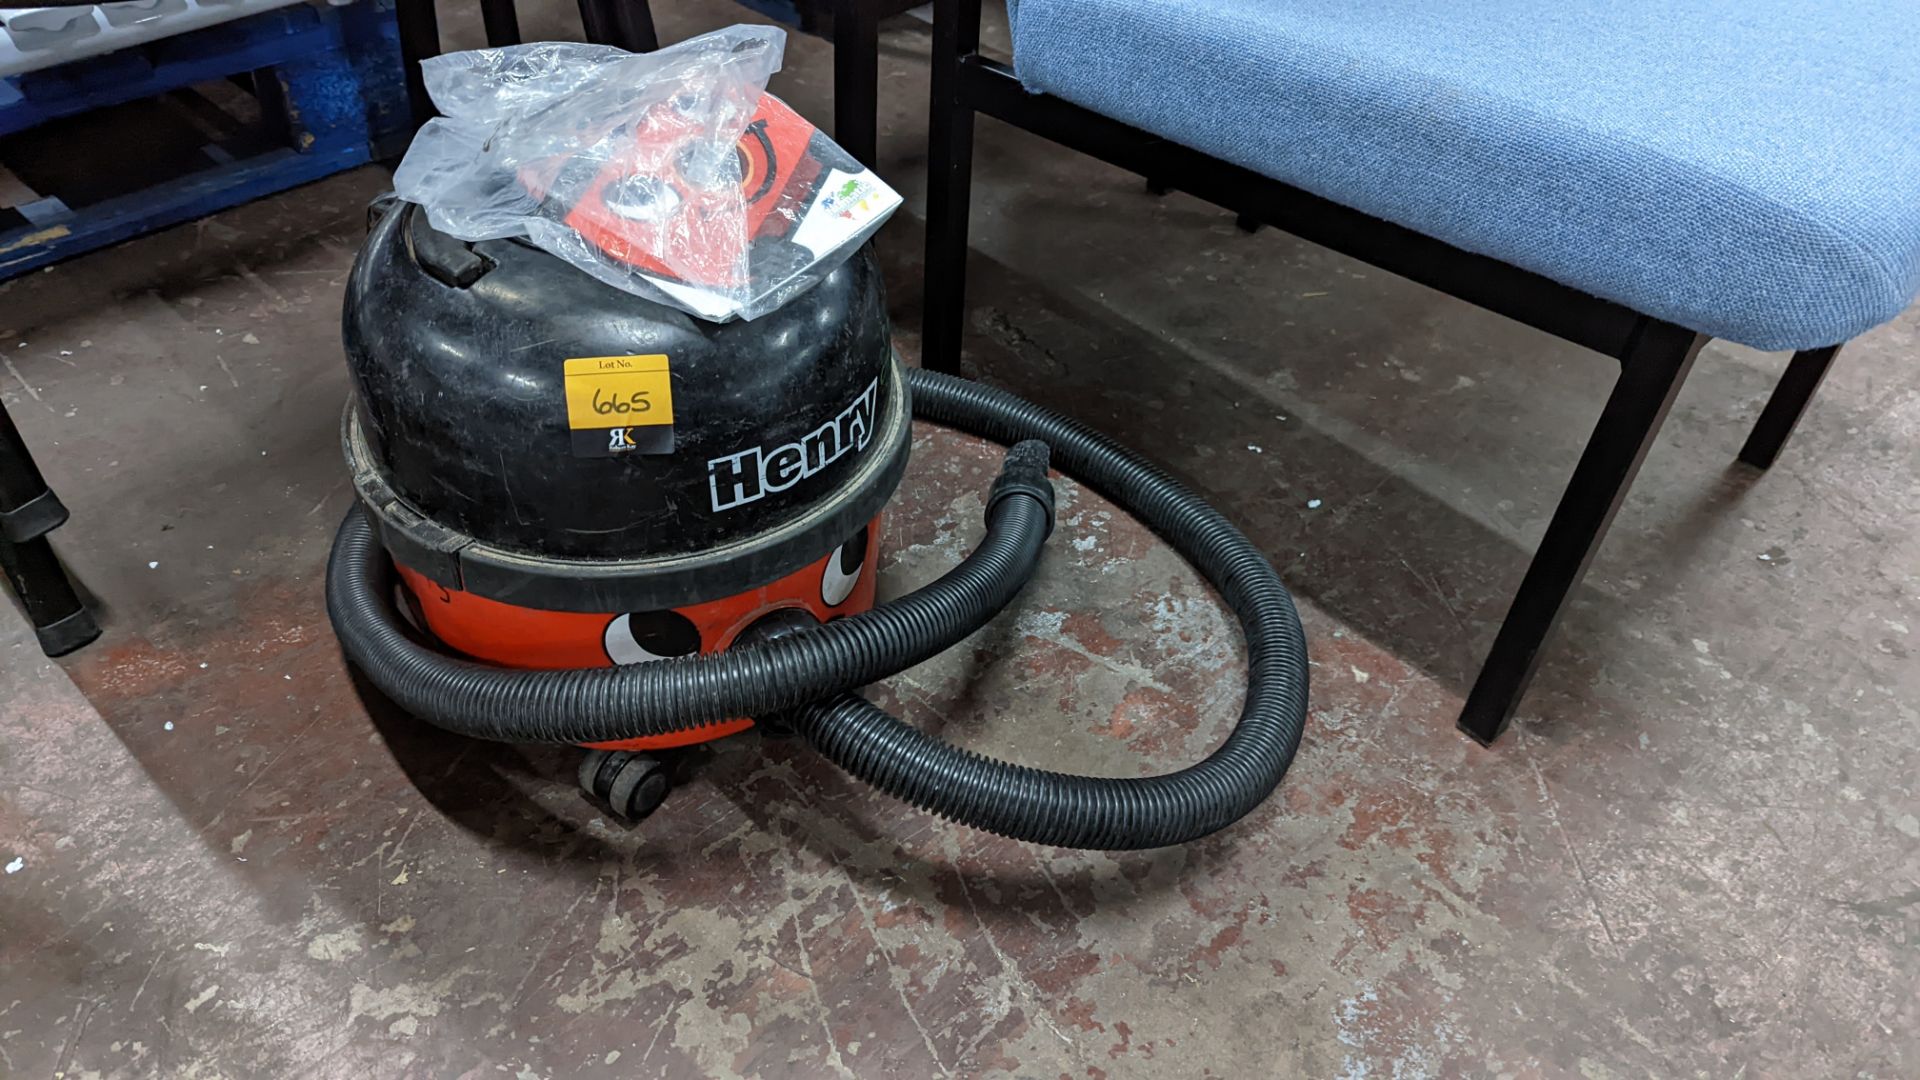 Henry vacuum cleaner - Image 3 of 5